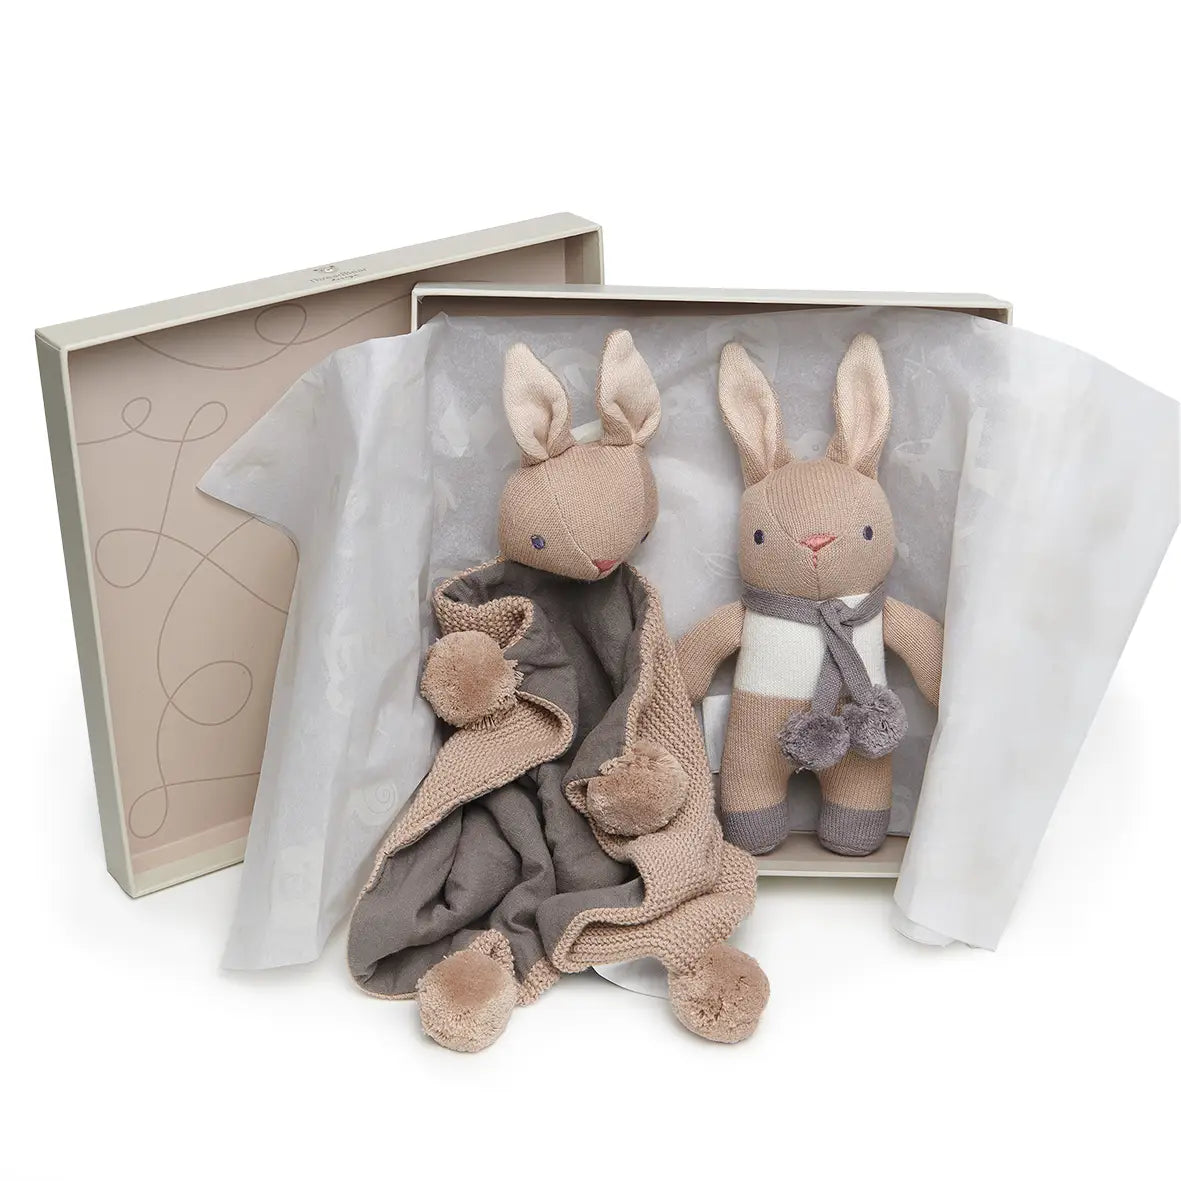 Baby Gift, Soft Bunny Toy And Comforter Boxed